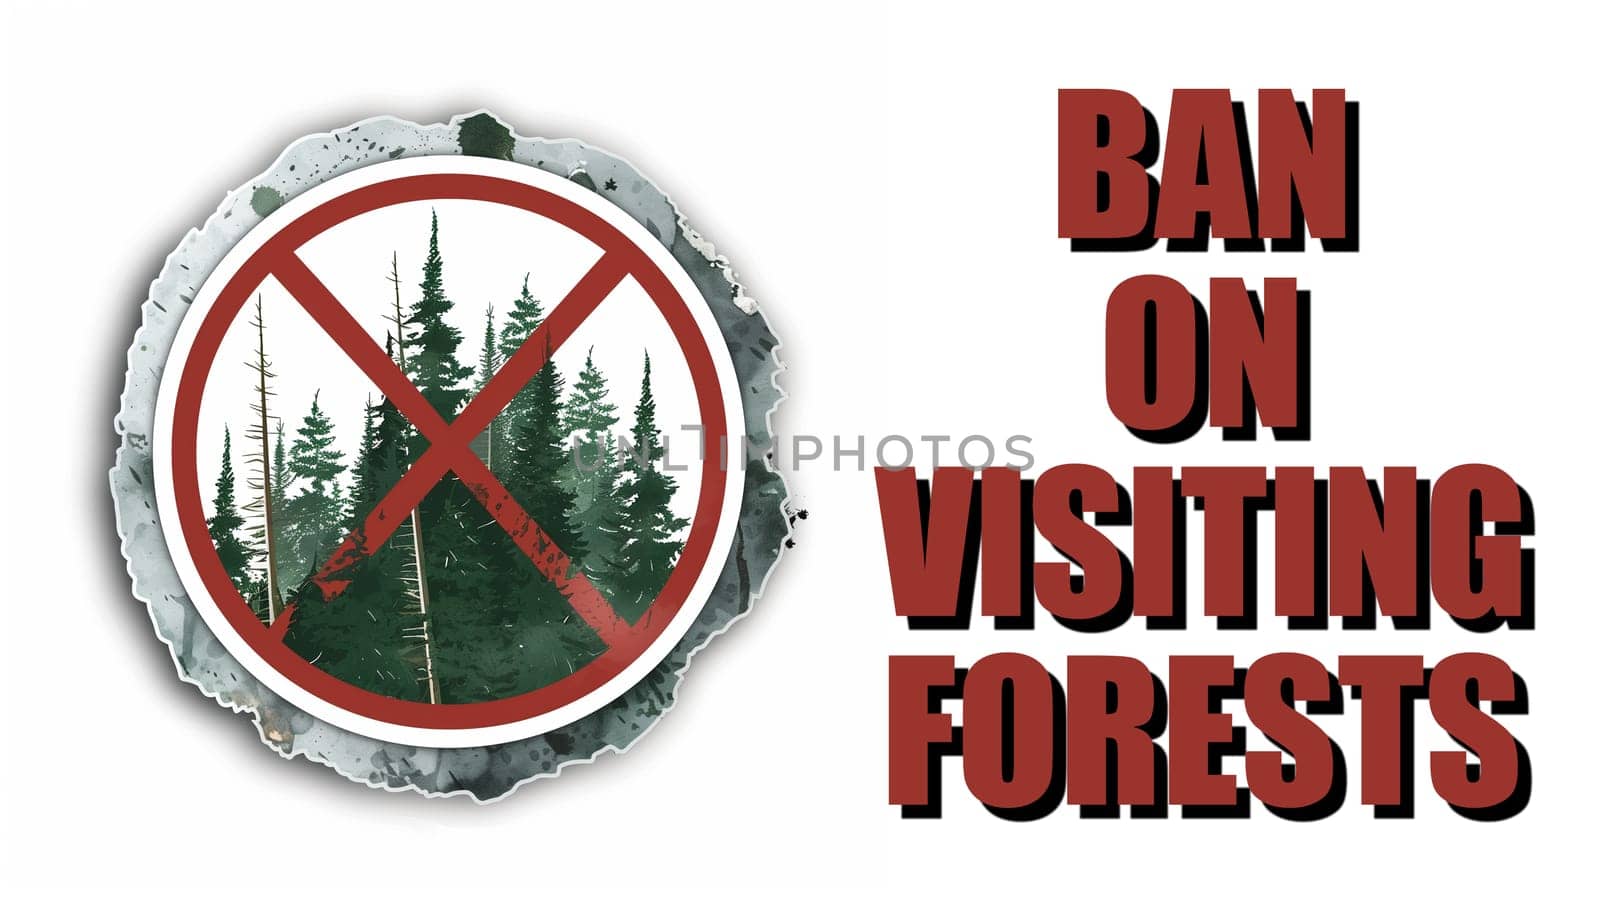 People being turned away at a forest entrance due to a ban on visiting forests. A sign with the ban notice is prominently displayed.